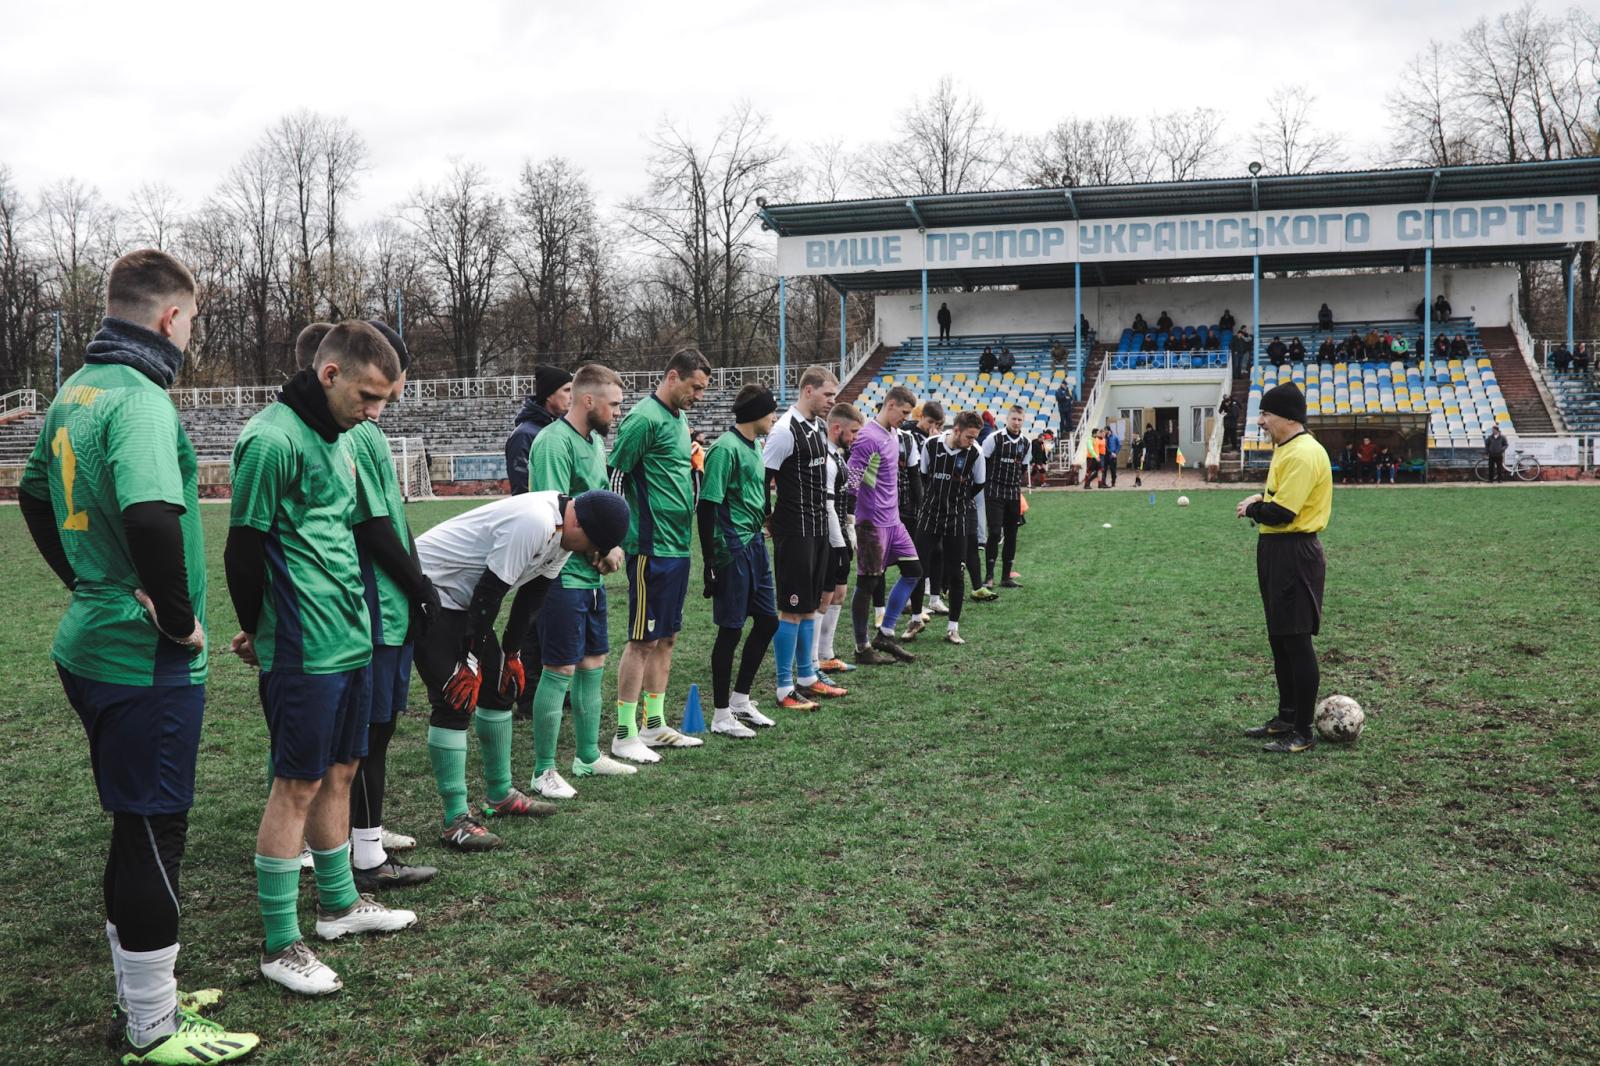 Anadolu/Getty - First vestige of football in Ukraine after more than 50 days of war - A minute of silence, the proclamation of all Ukrainians:...